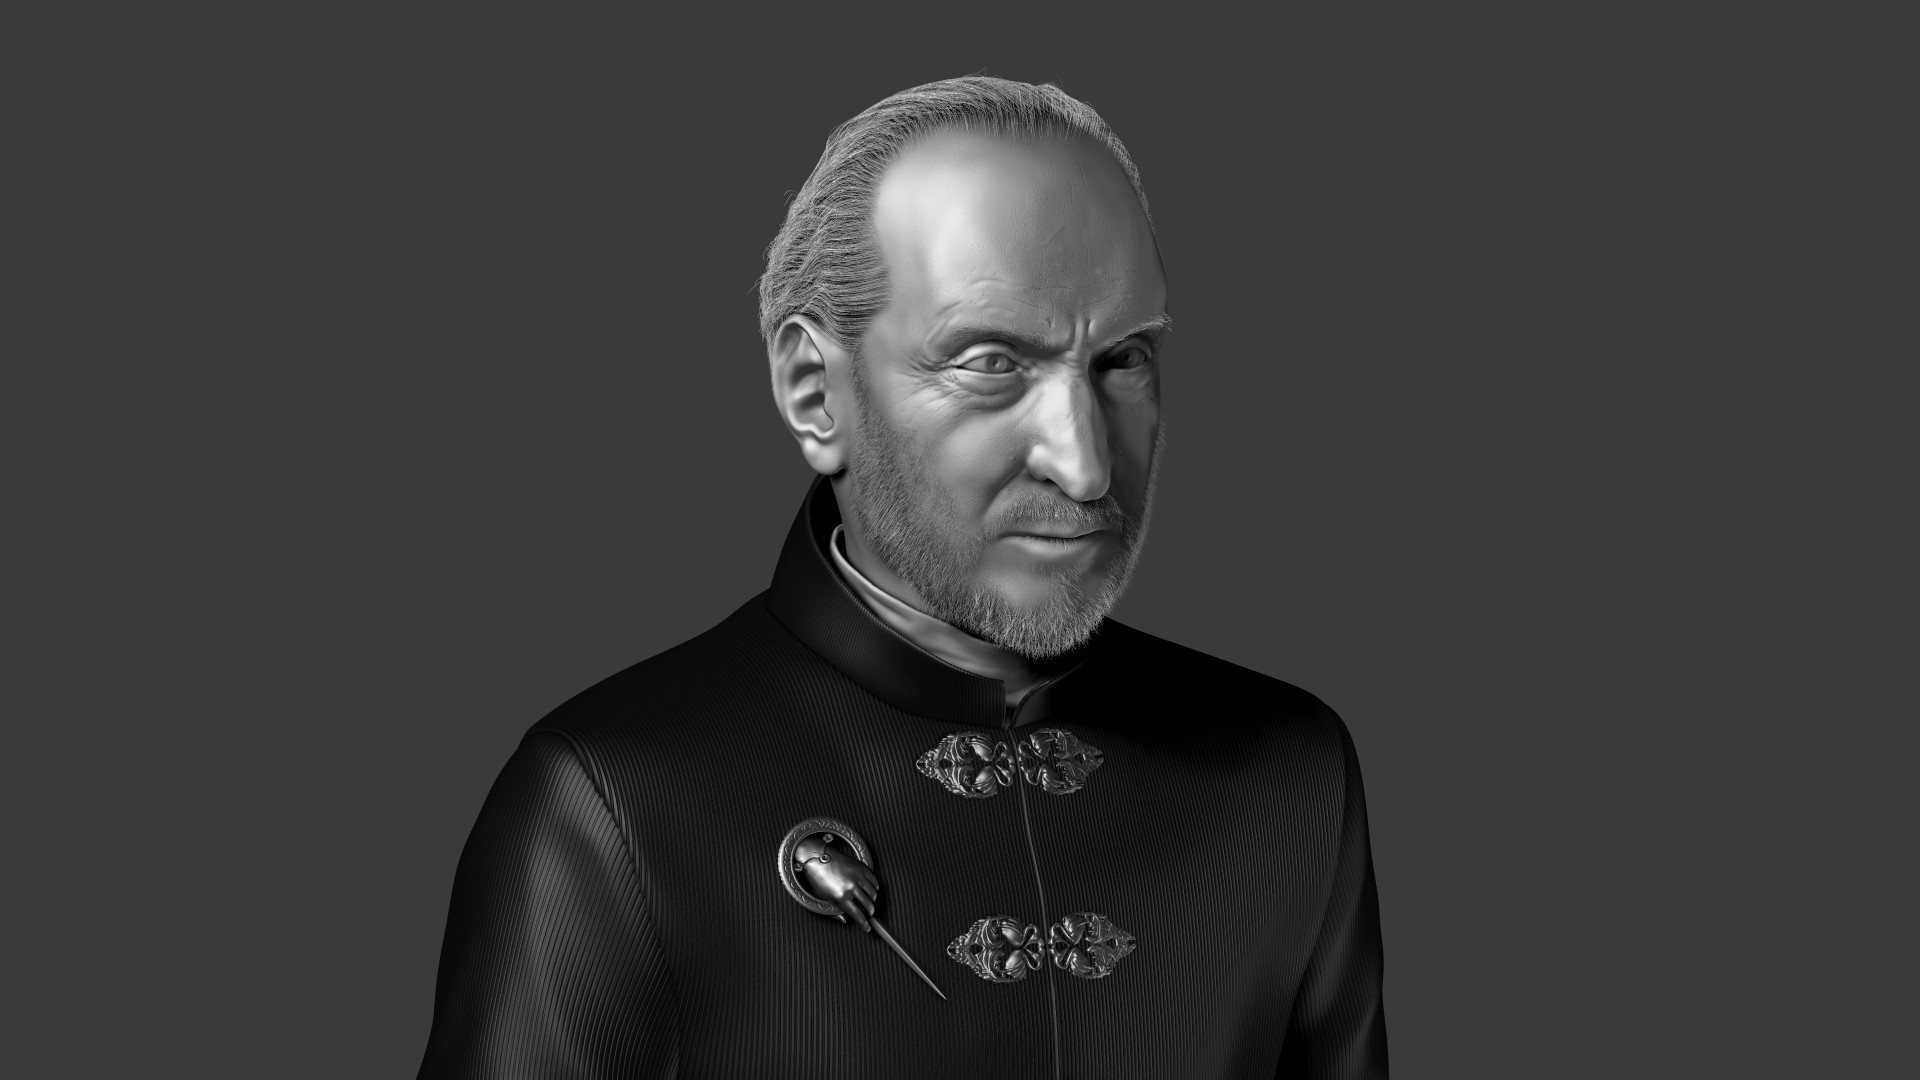 tywin lannister zbrush